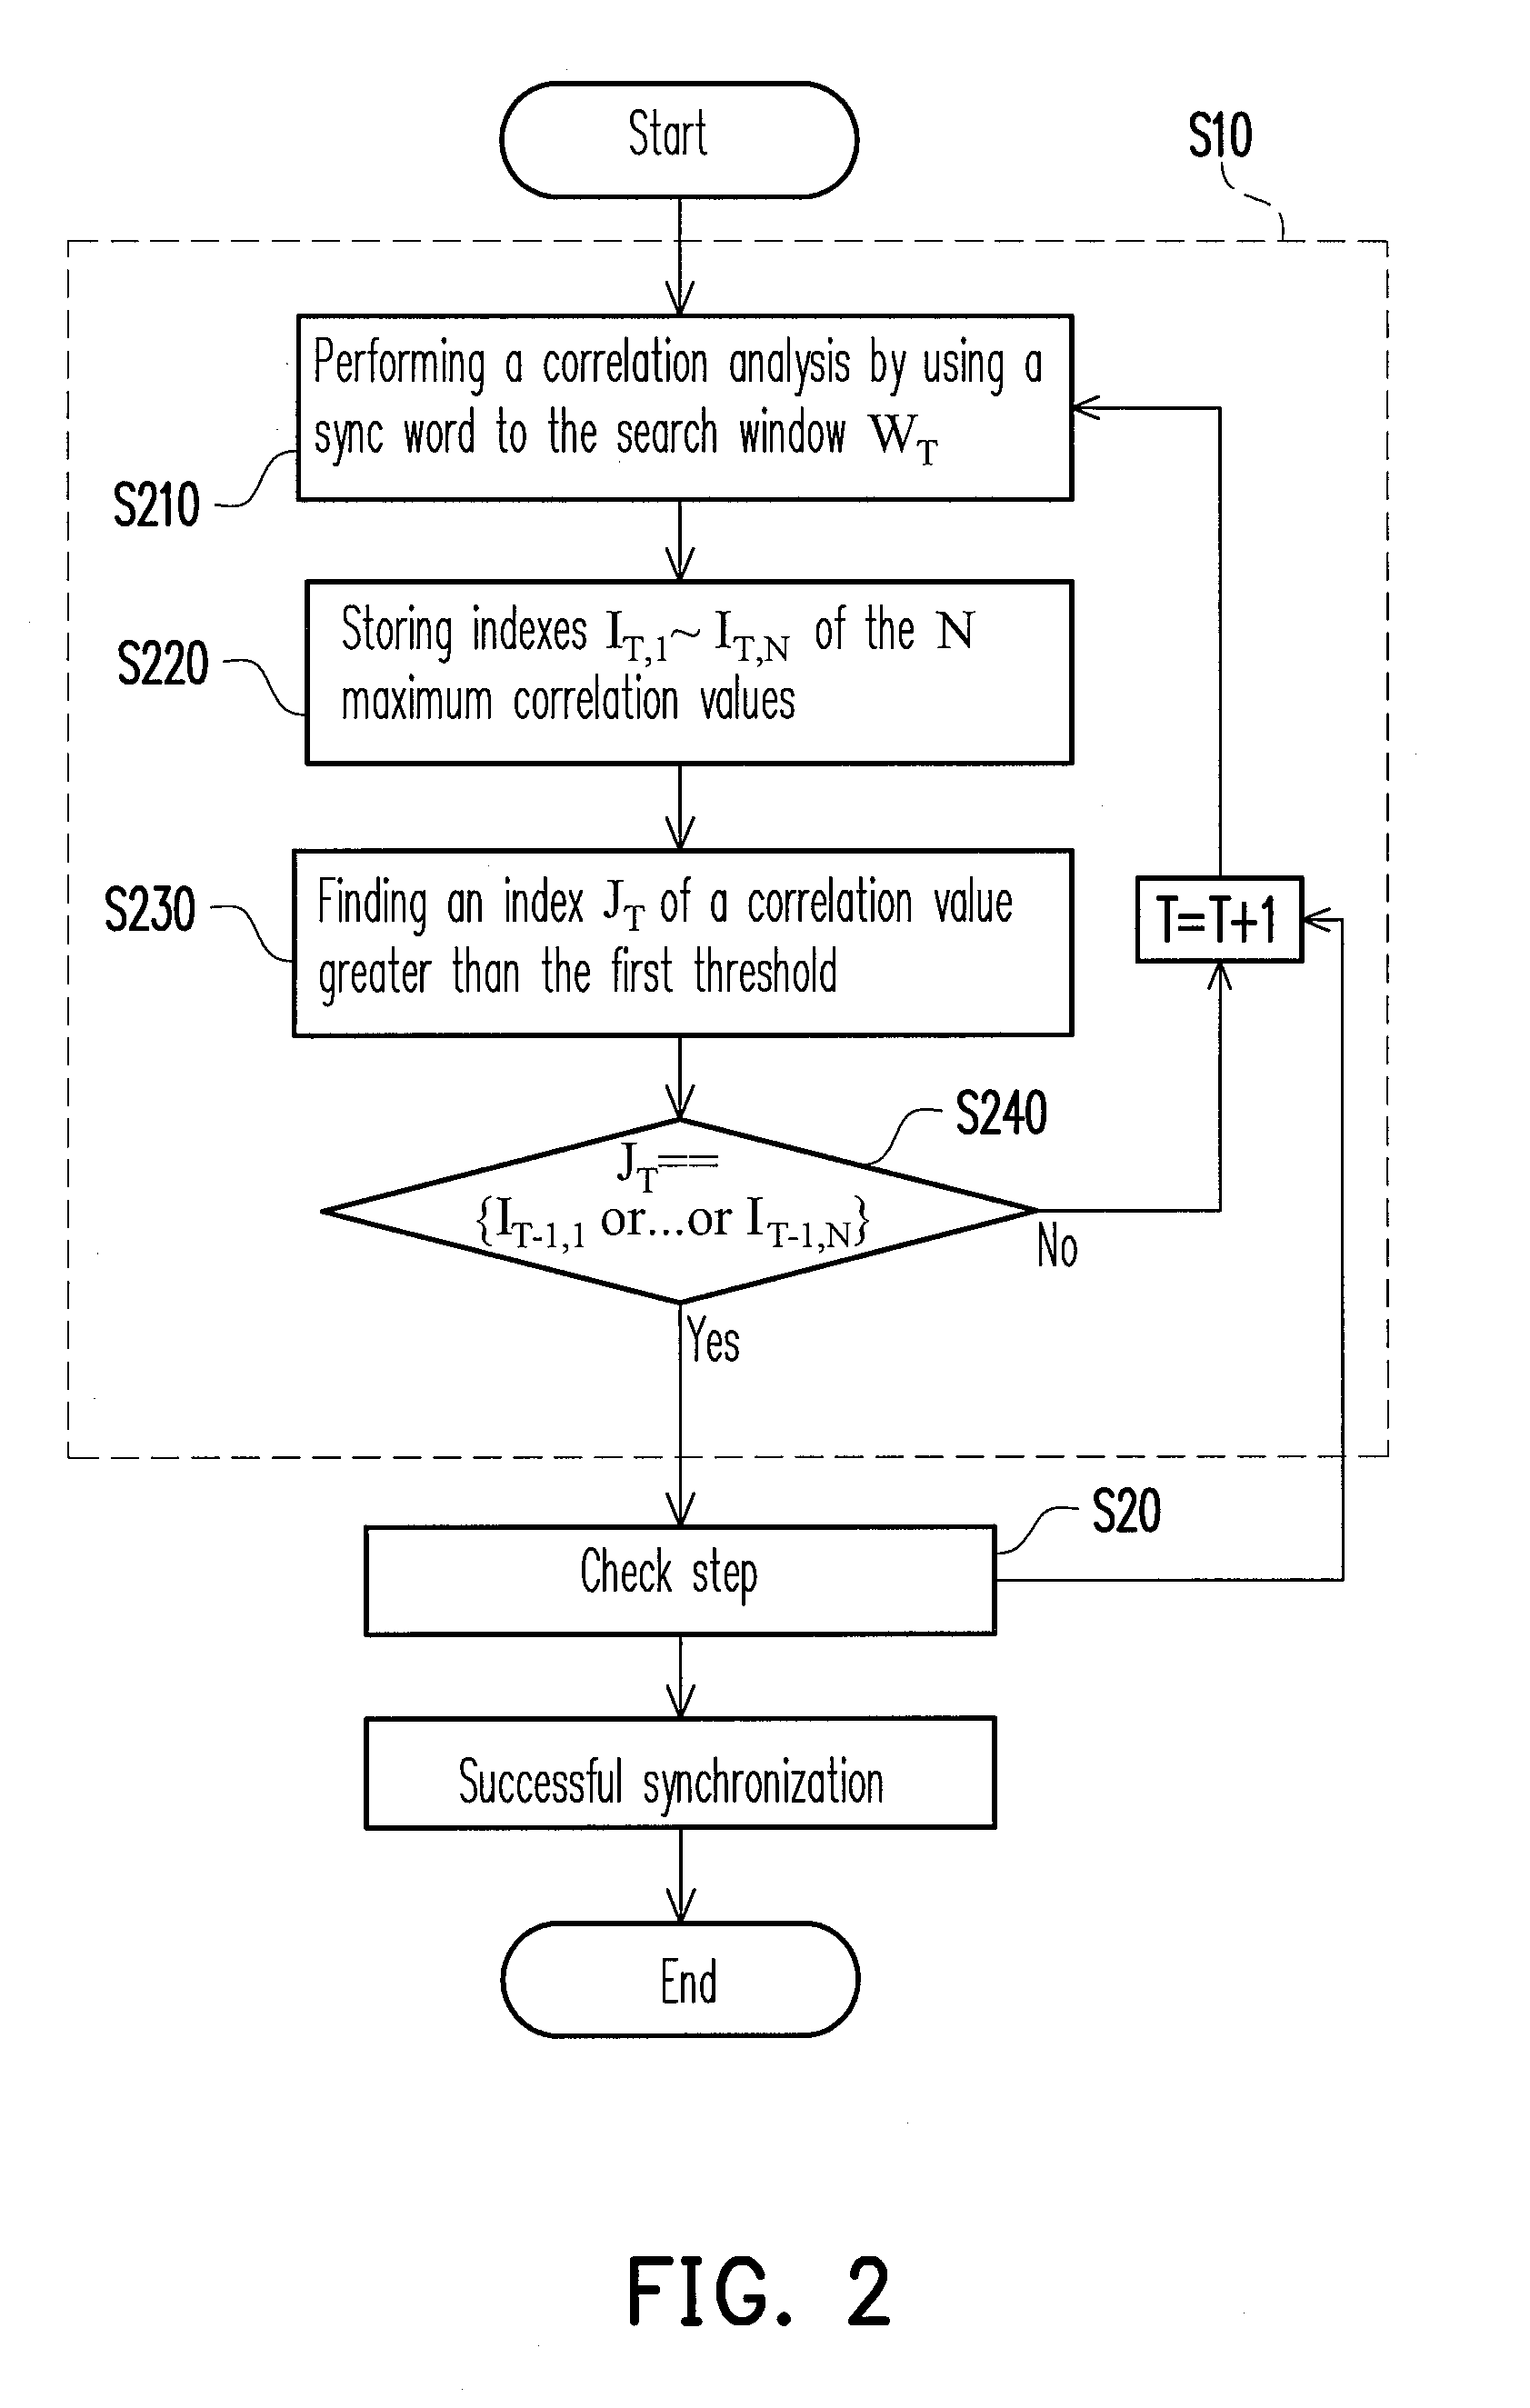 Frame synchronization apparatus and method based on differential correlation in communication system